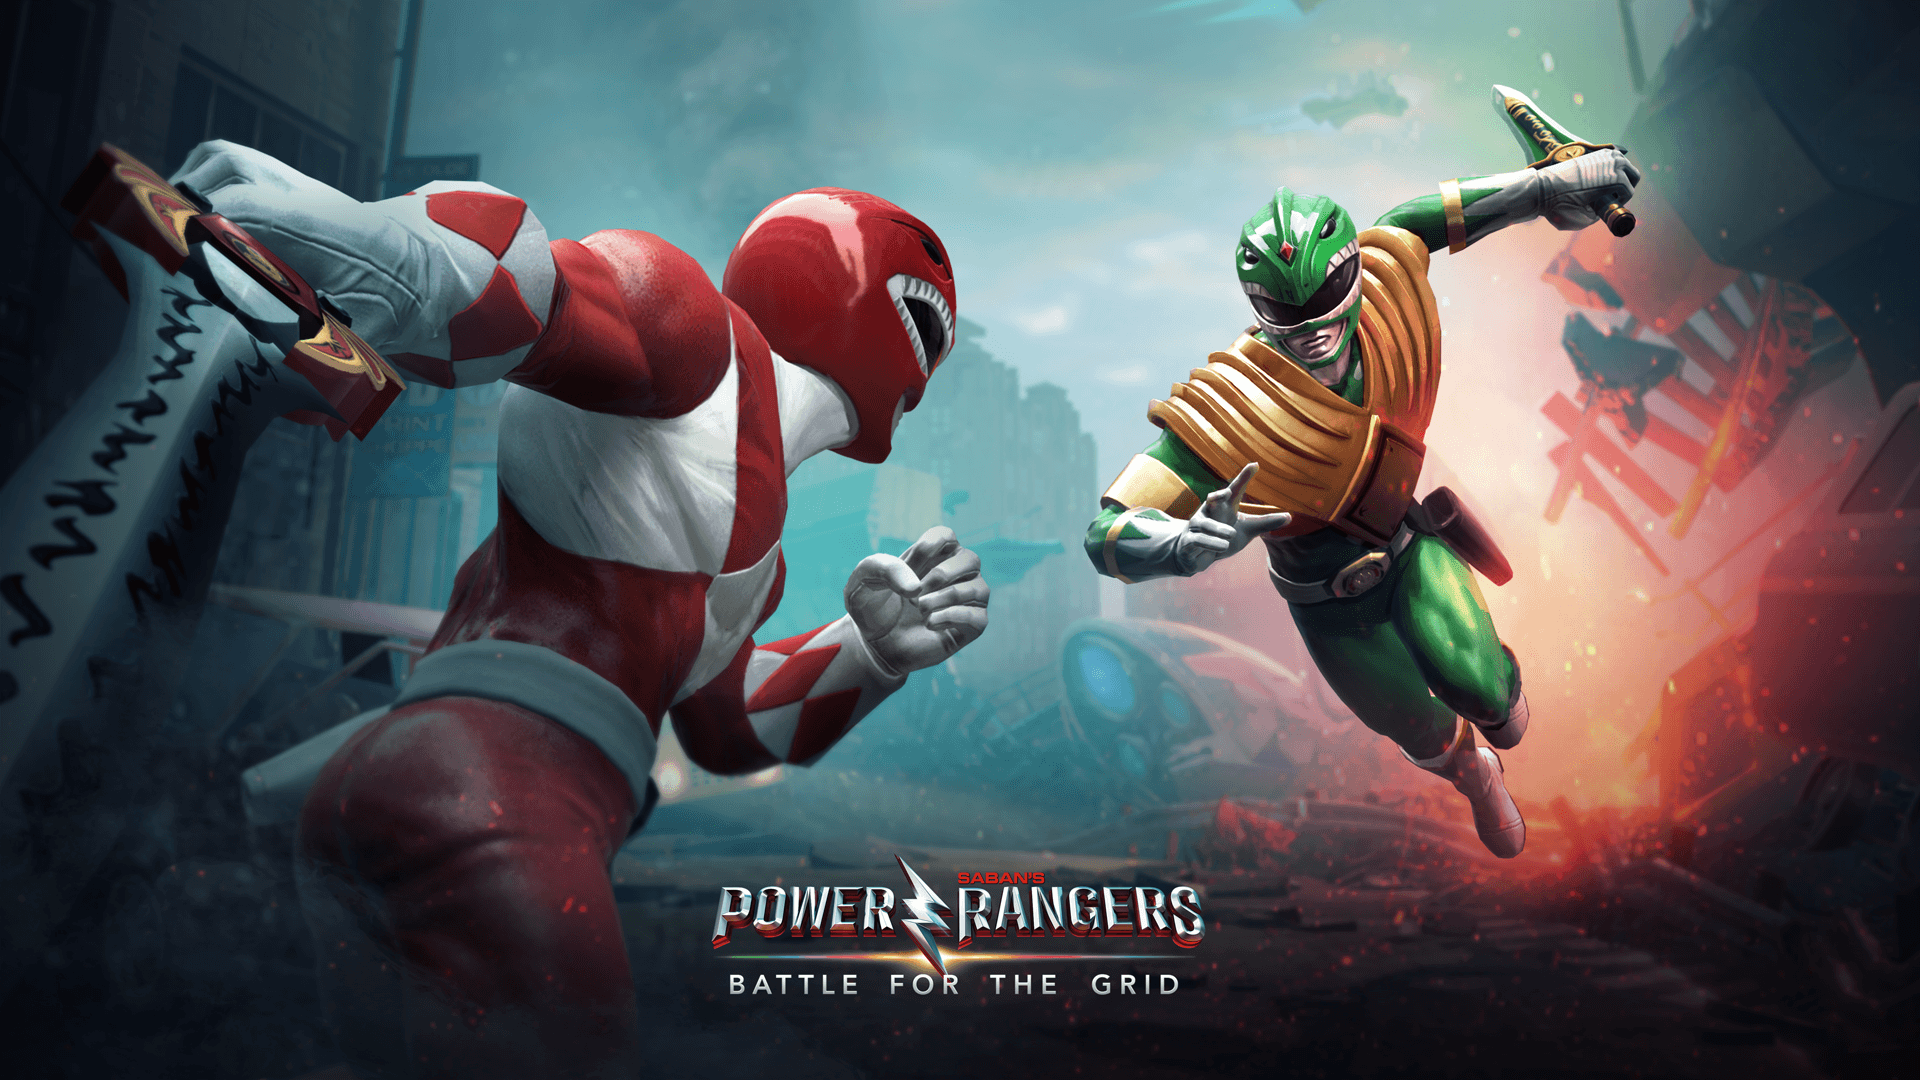 Power Rangers: Battle For The Grid PS4 Review – Mighty Morphin’ Fisticuffin’